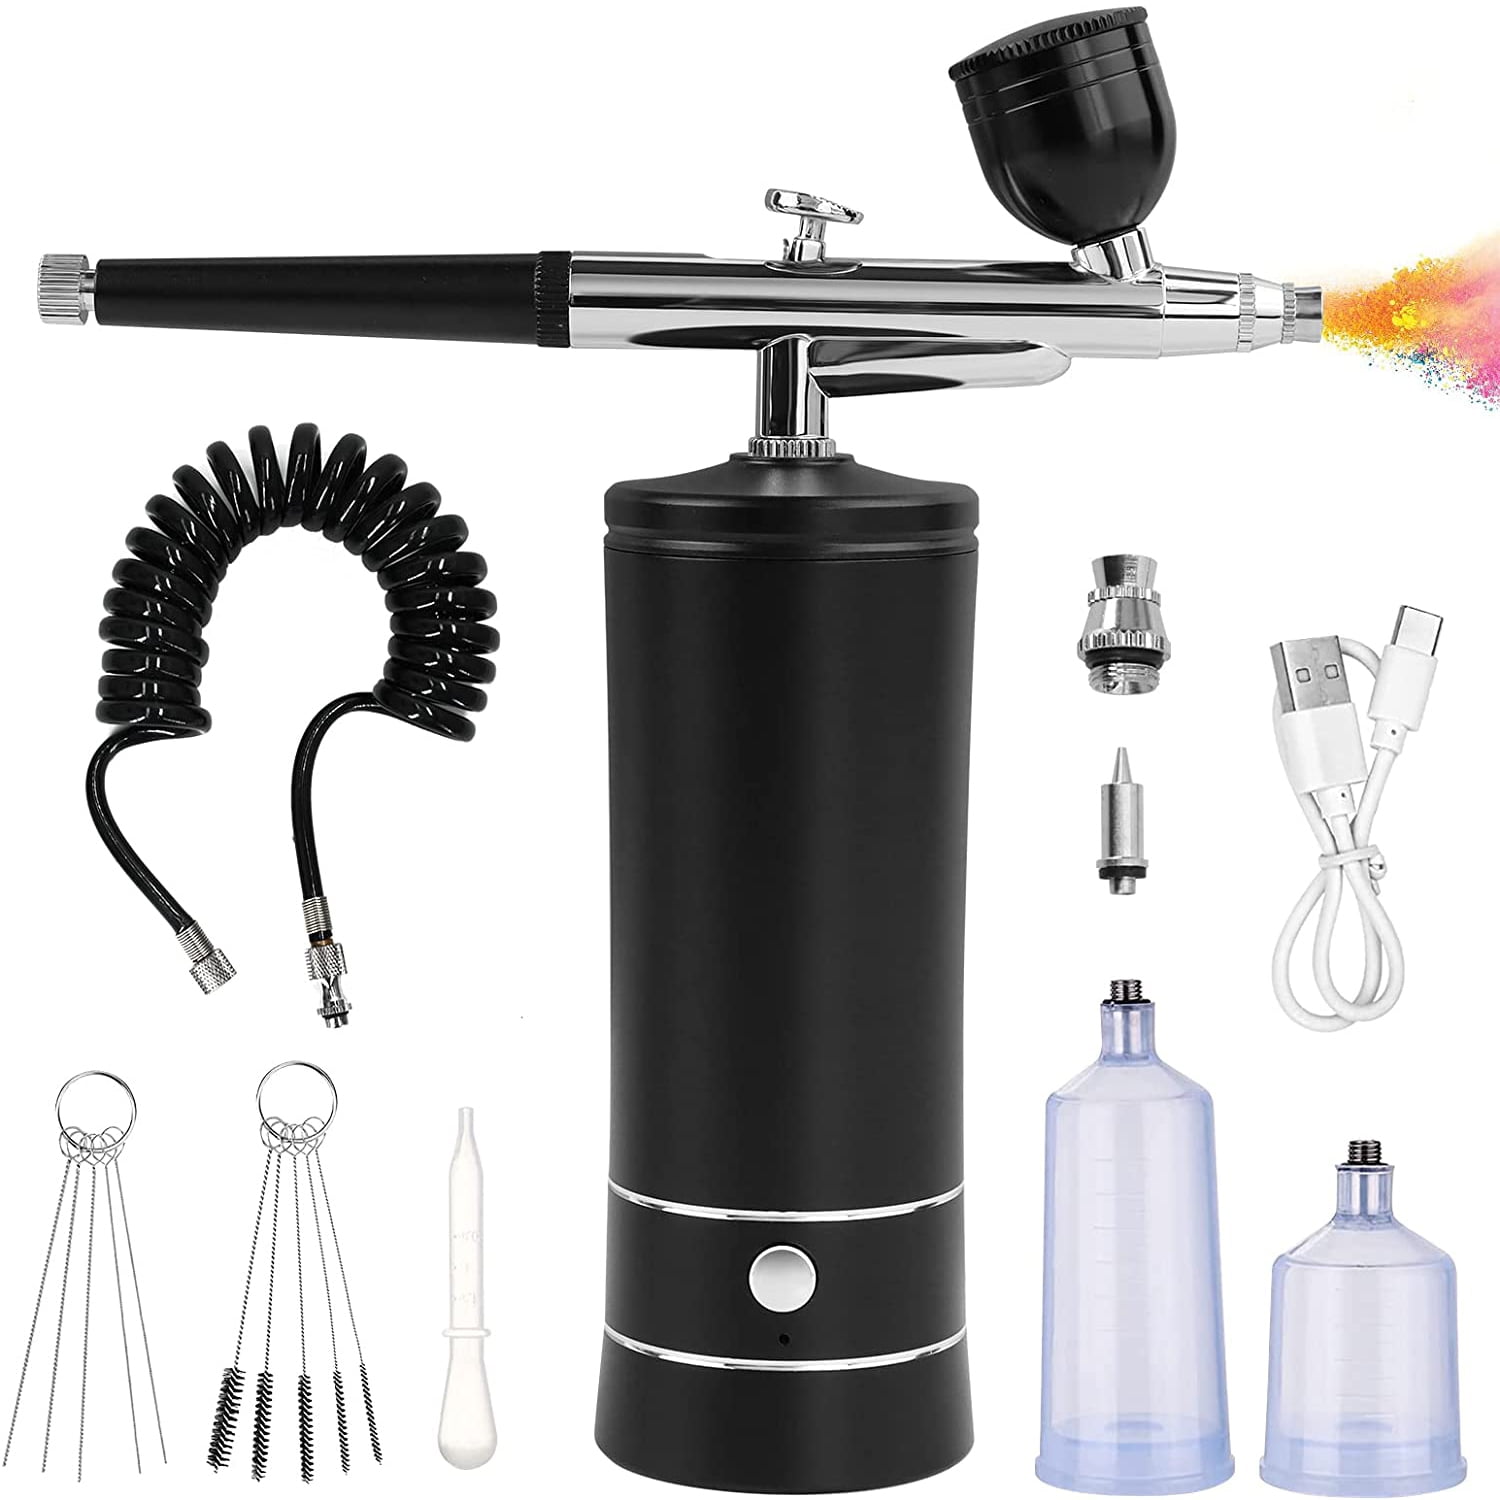 Master Airbrush Airbrushing System Kit with A G34 Multi-Purpose Gravity Feed Dual-Action Airbrush with 1/16oz. Cup and 0.3mm Tip, Mini Air